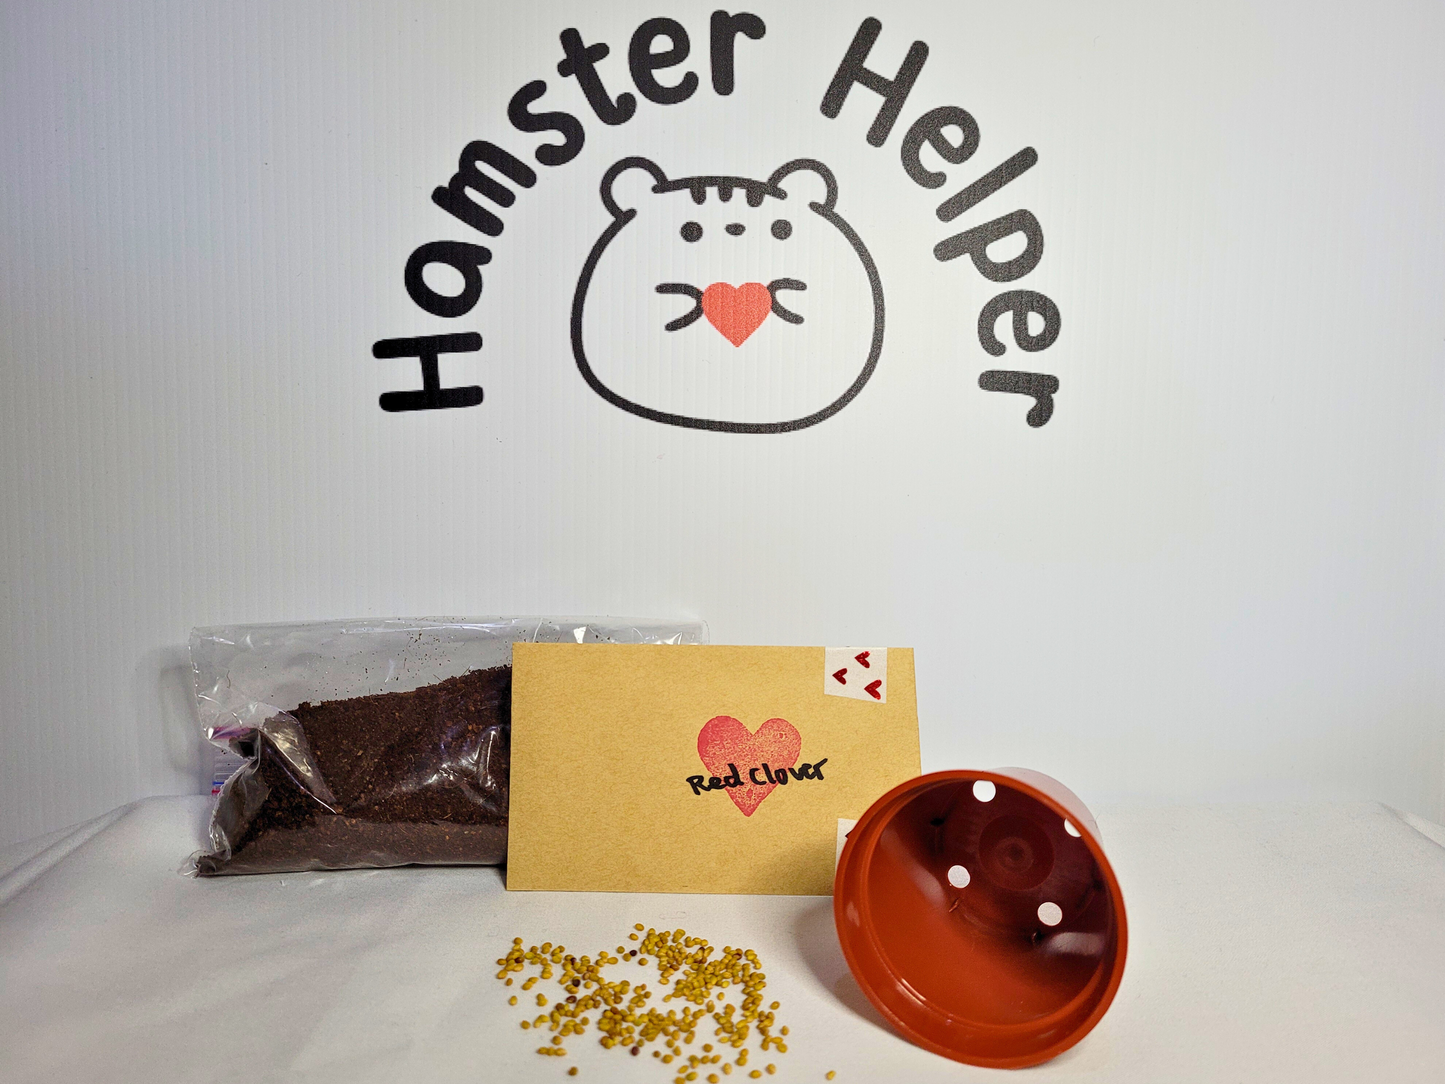 A kit for growing hamster safe red clover microgreens containing hamster safe soil, a plastic plant pot and some red clover seeds in front of the Hamster Helper logo